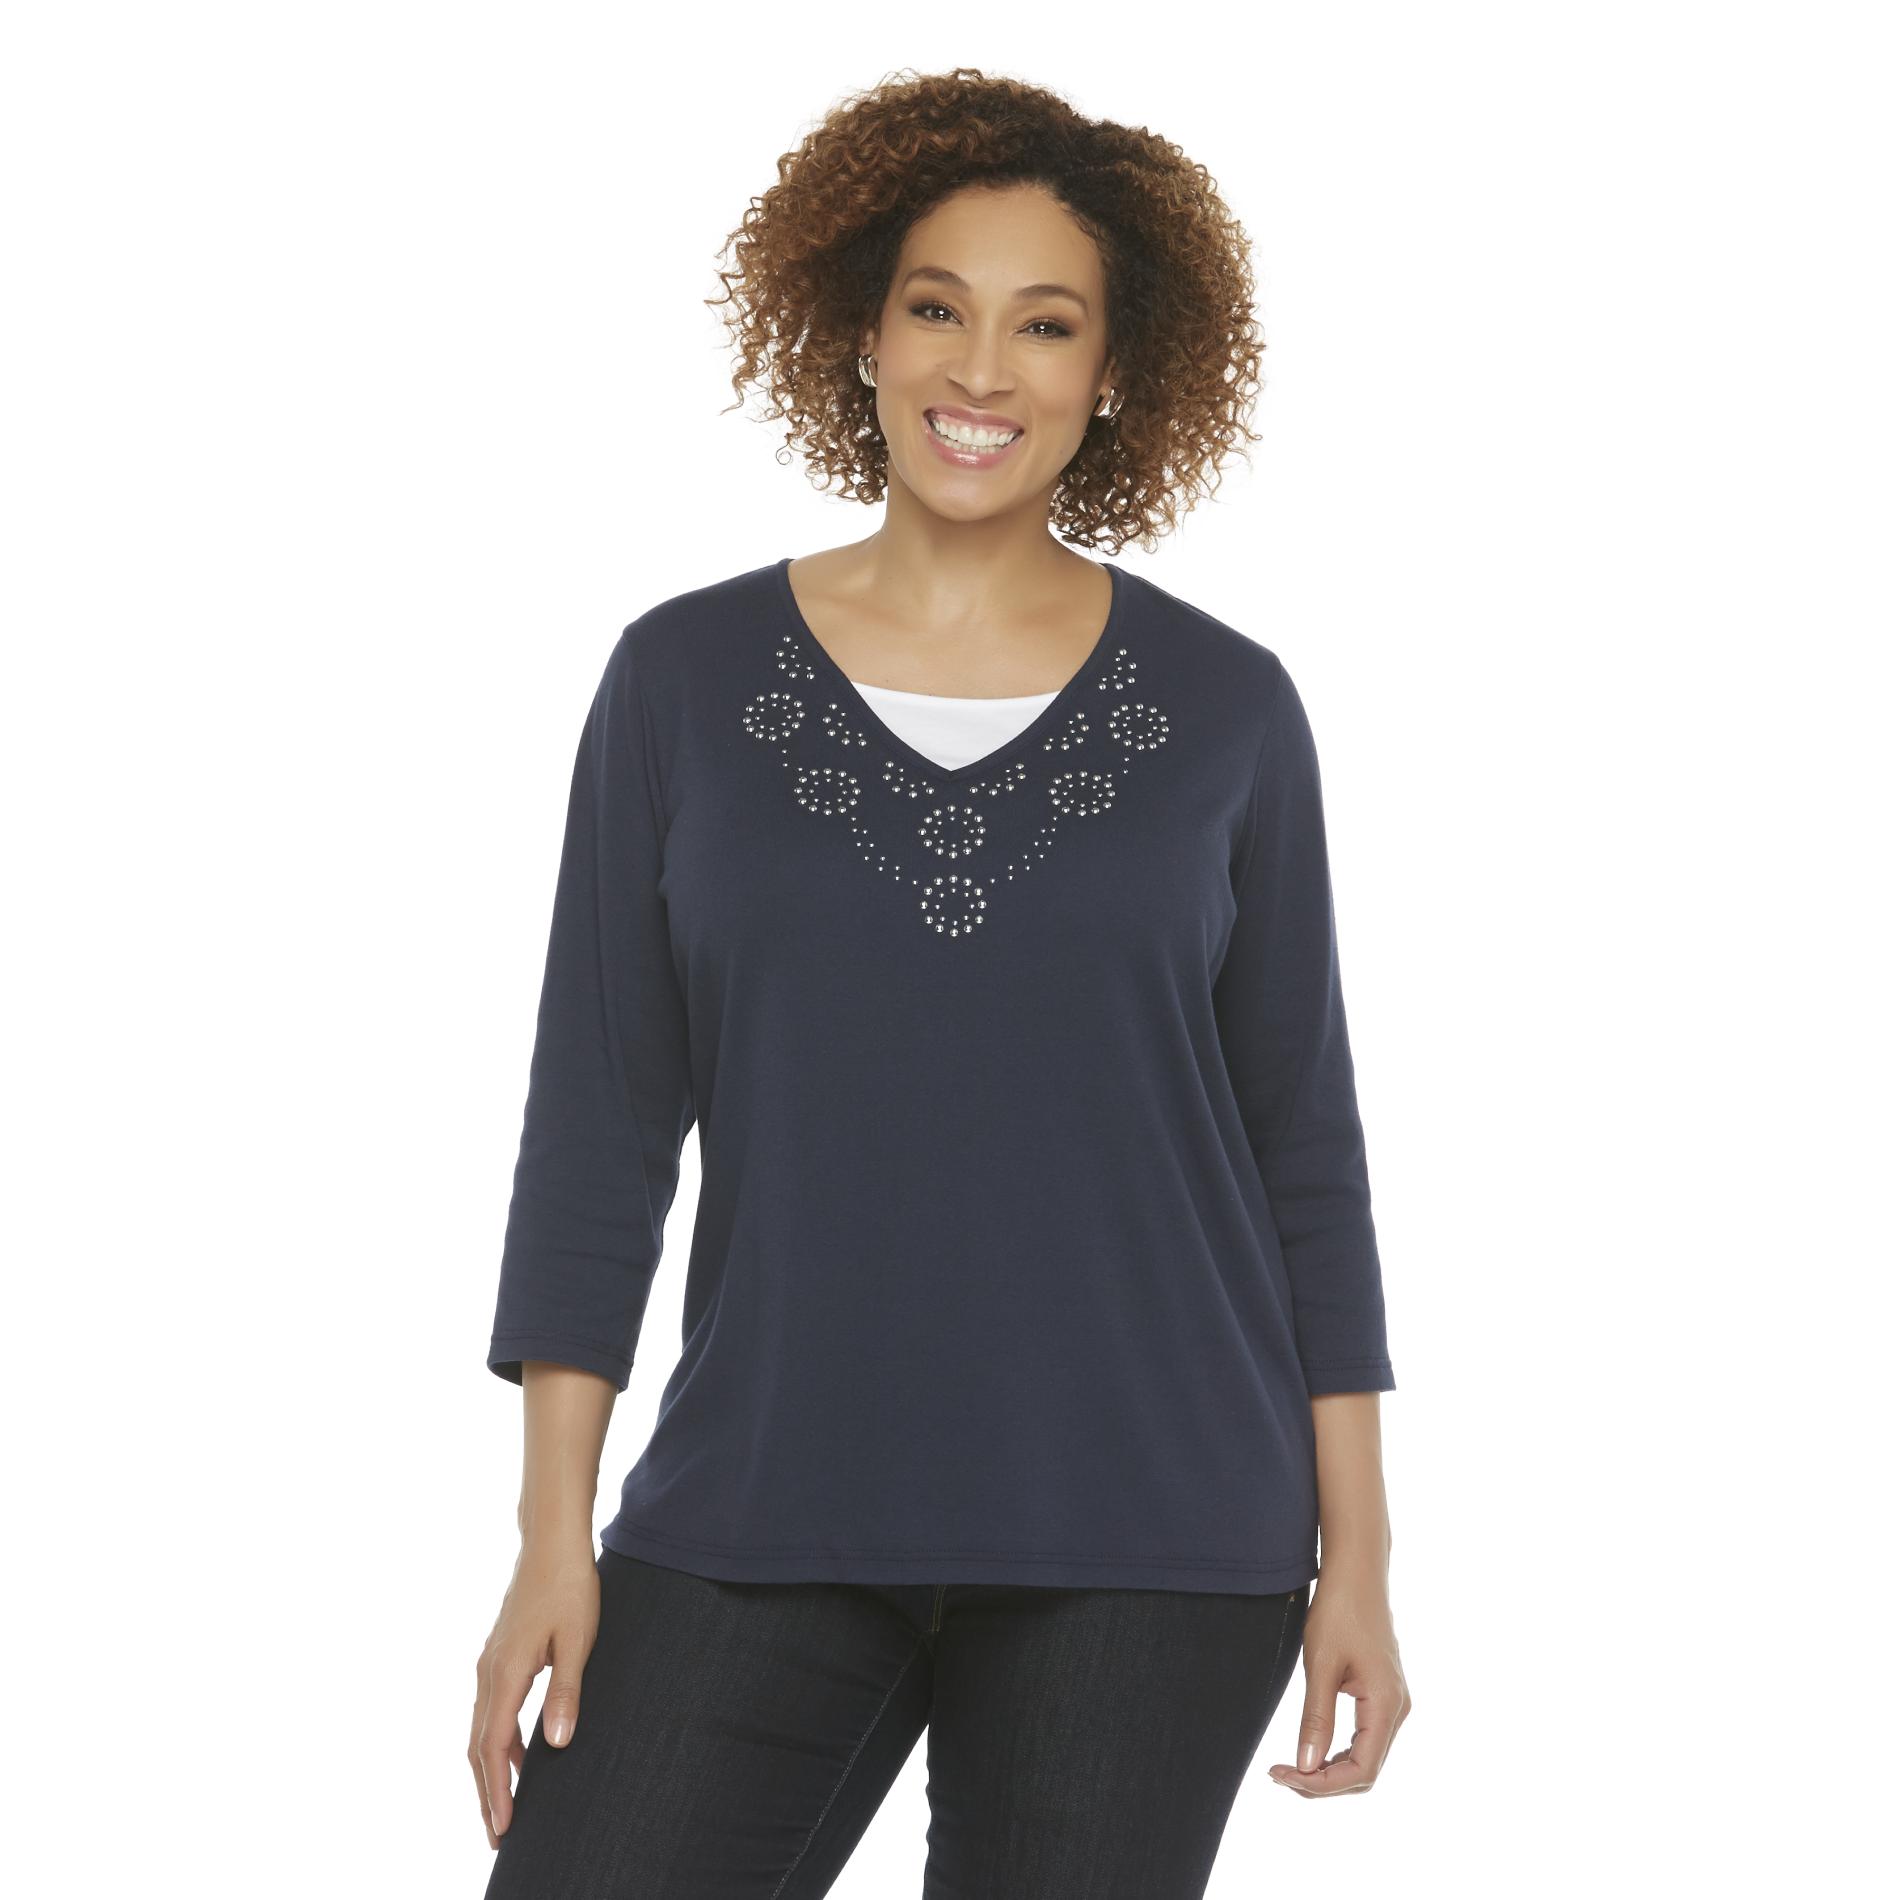 Basic Editions Women's Plus Embellished Layered-Look Top